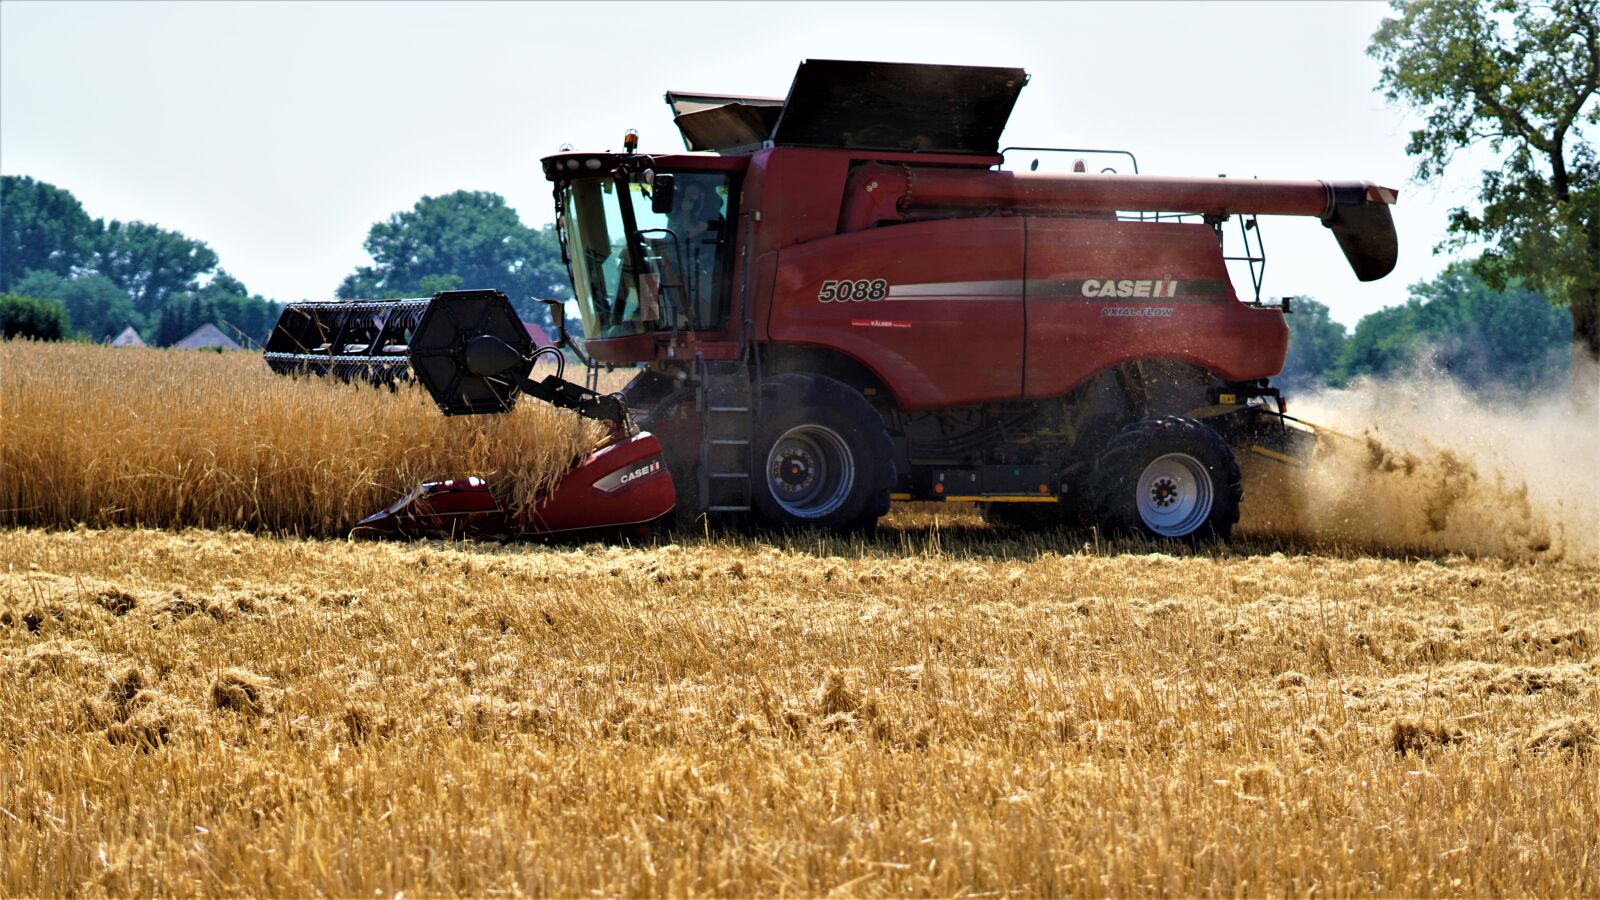 Sony a6000 sample photo. Harvest, summer, background photography